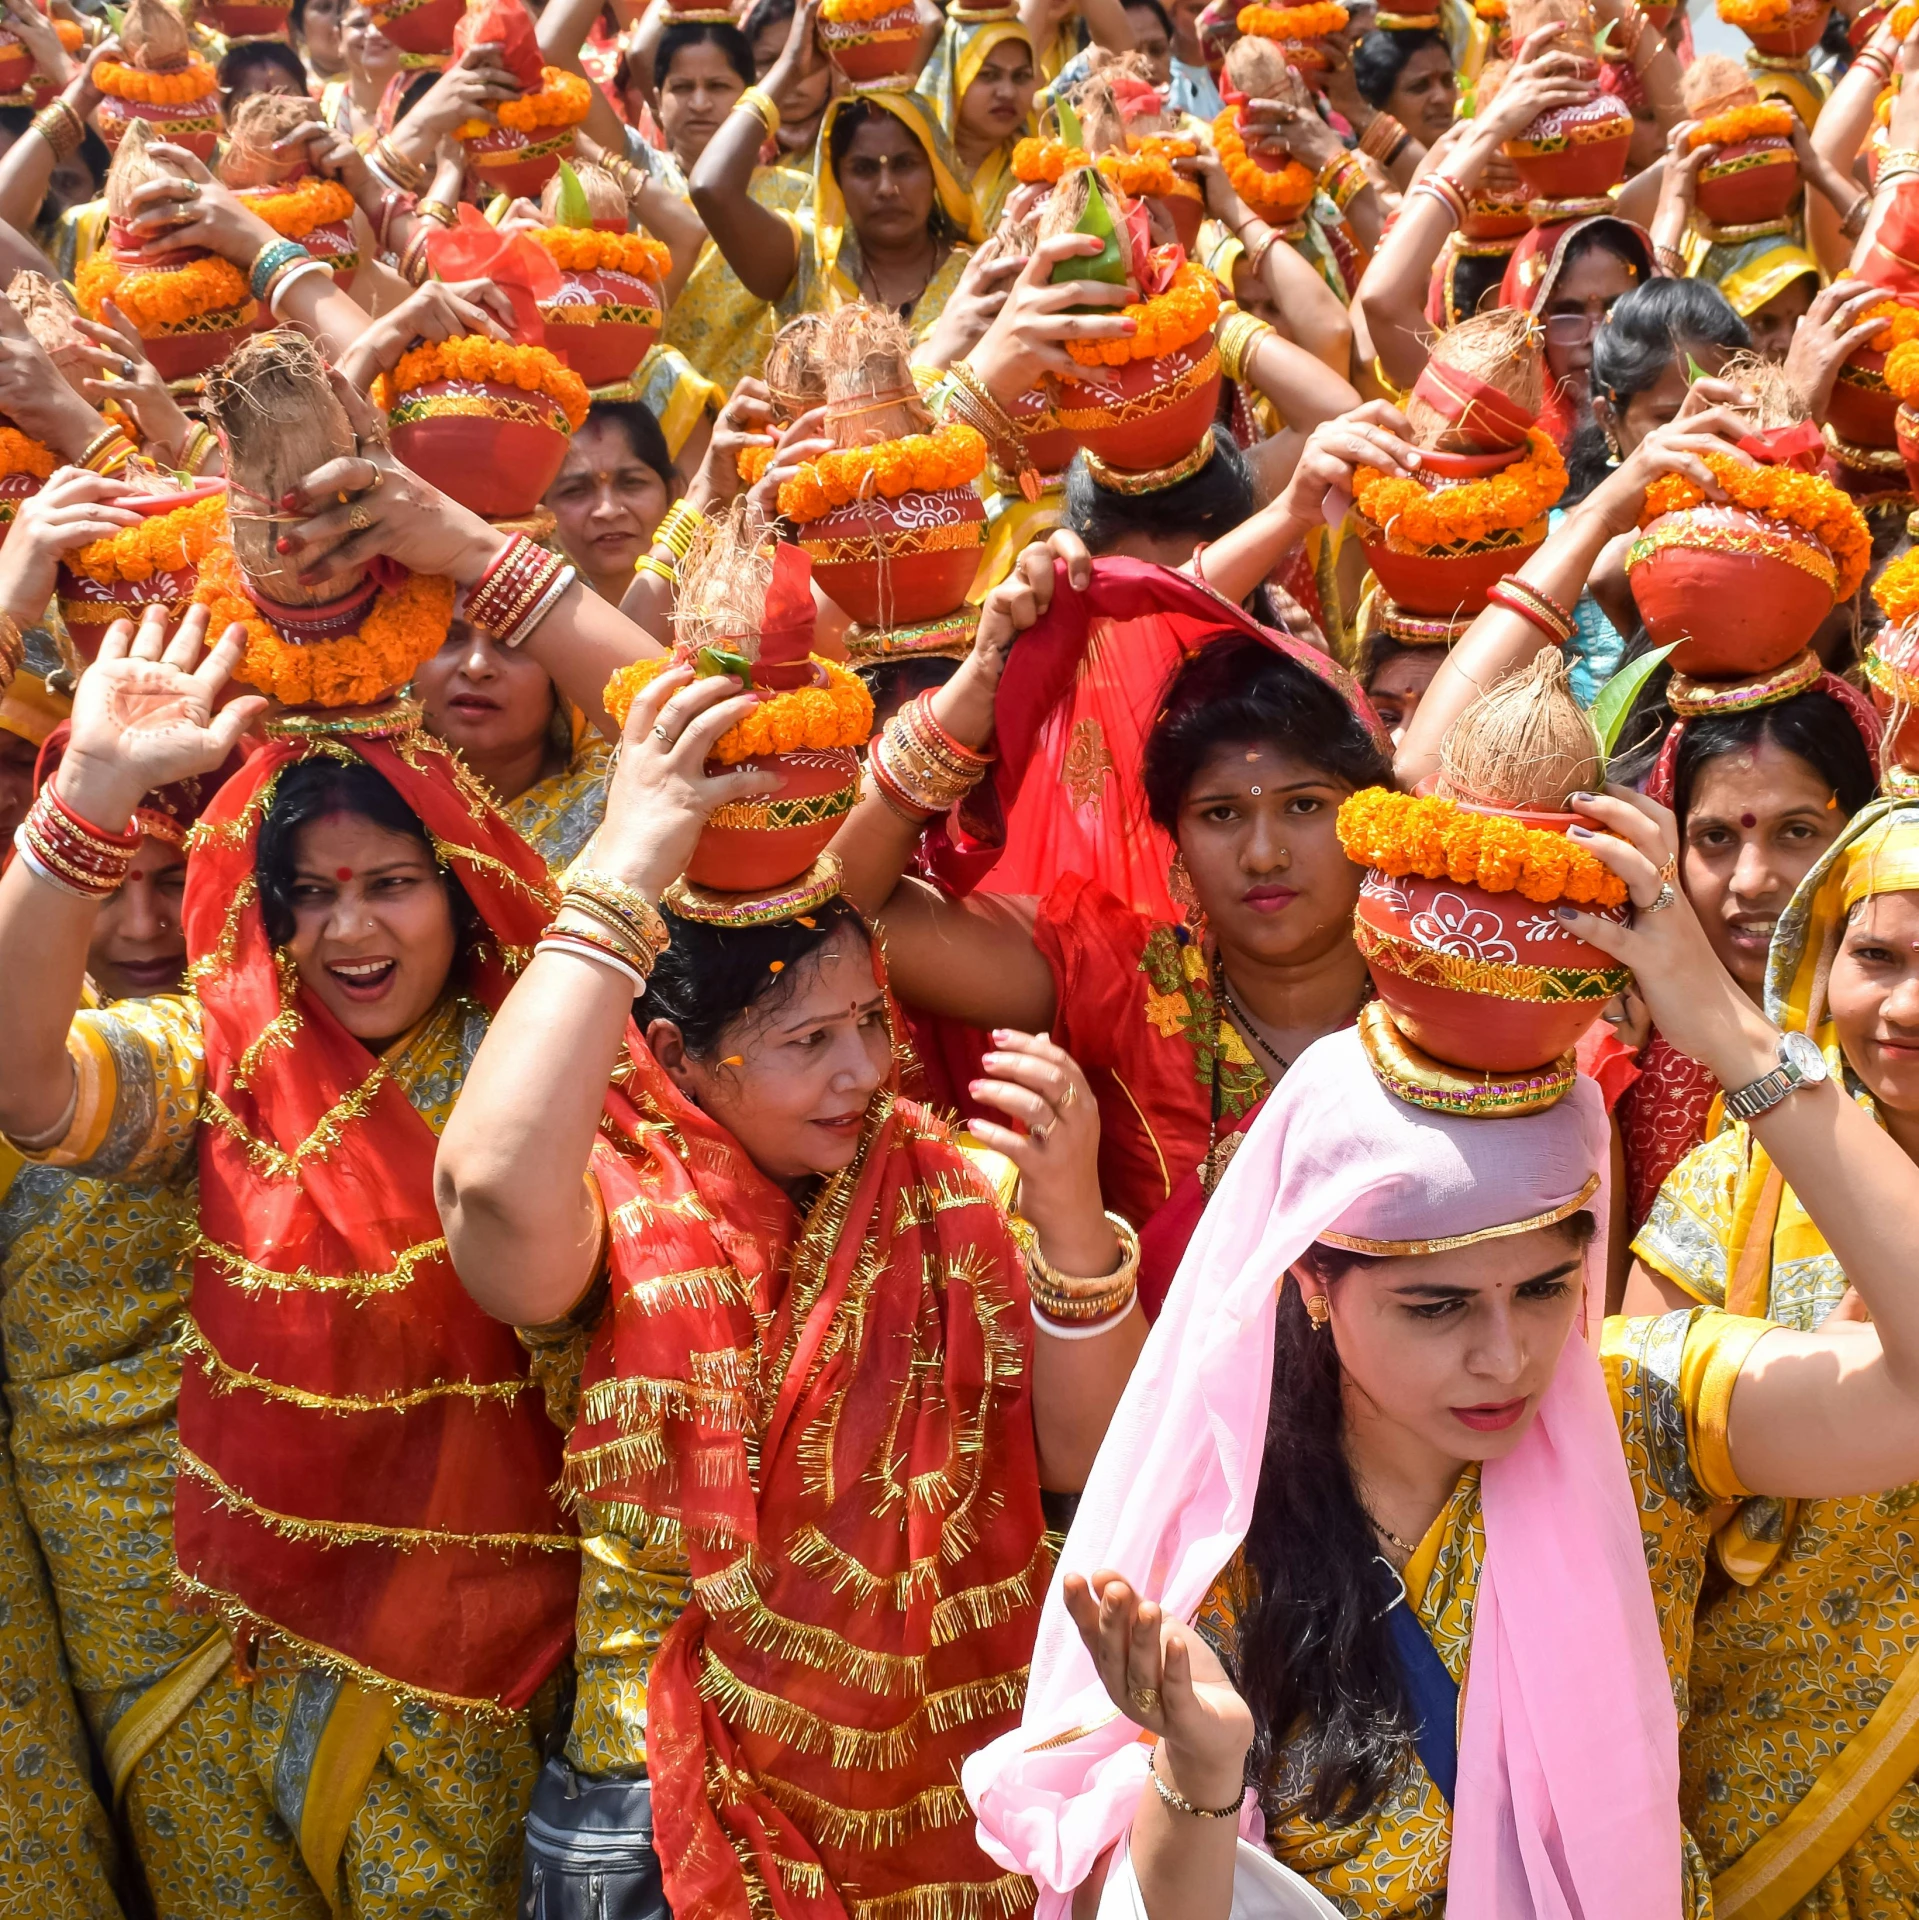 a group of women in indian dress with colorful costumes